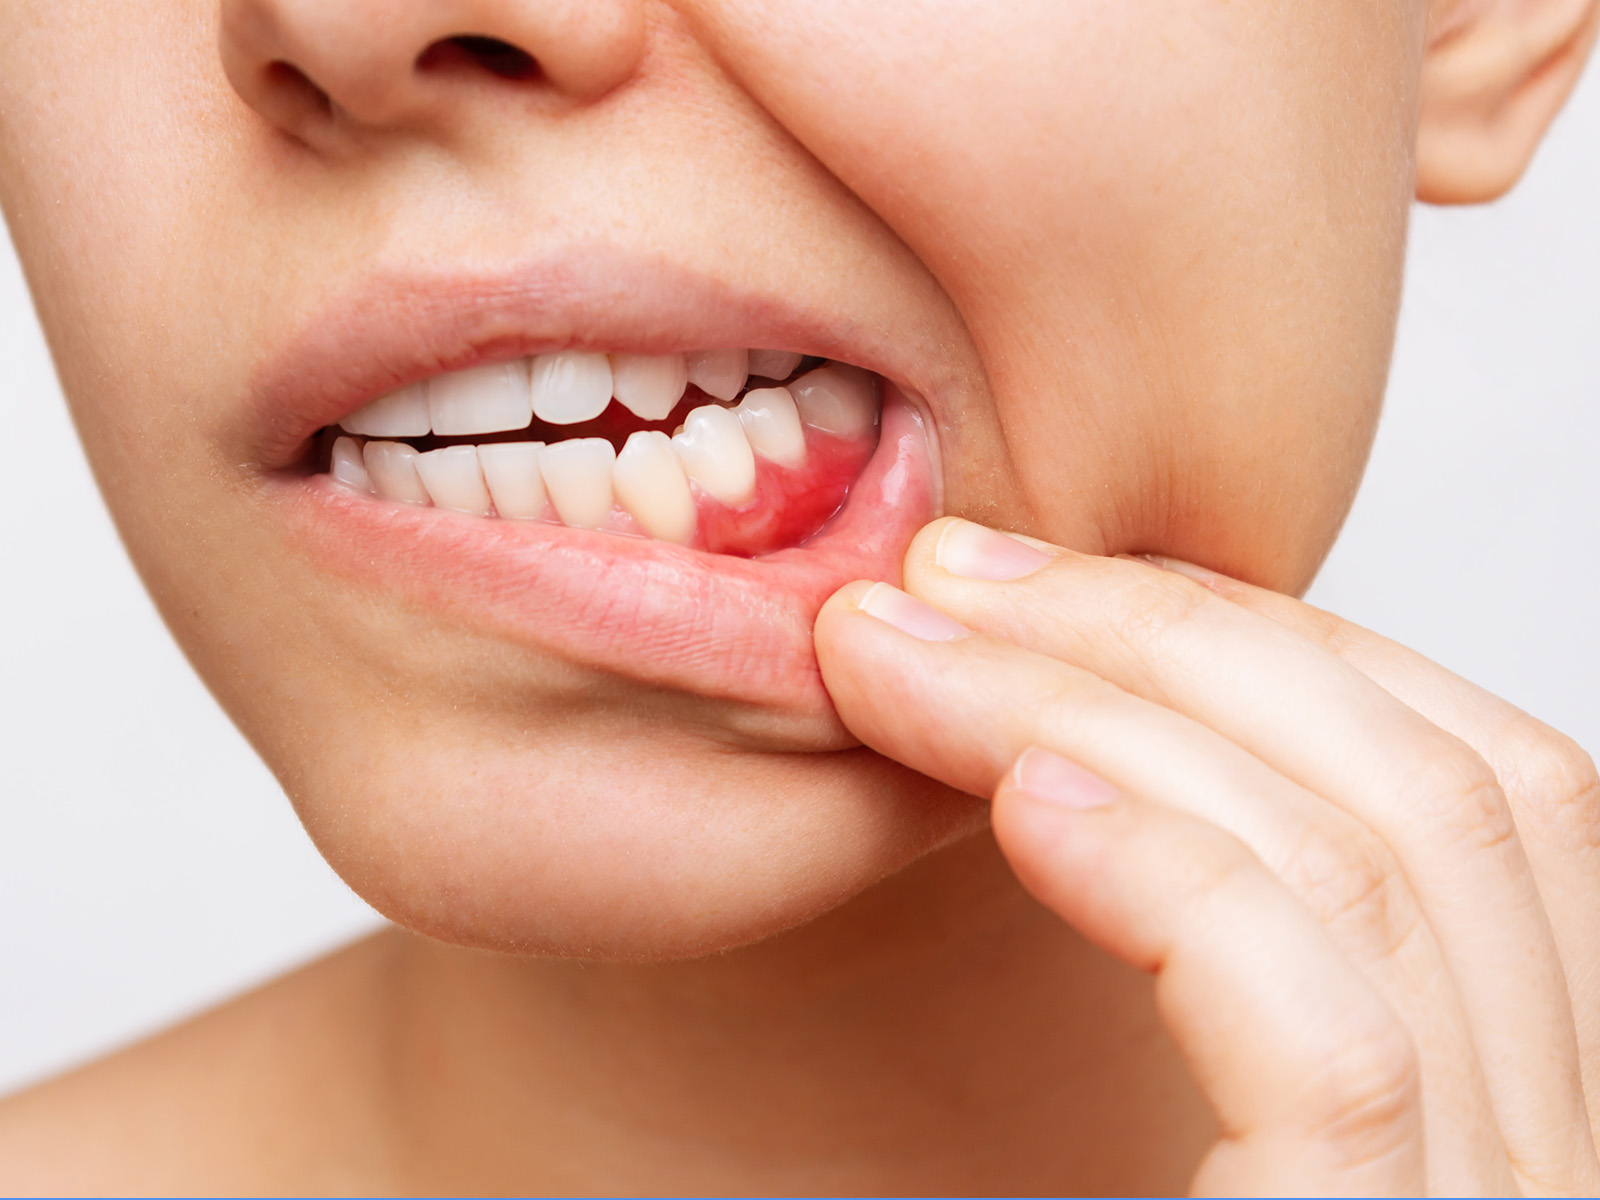 What Causes Dental Cysts on Gums?